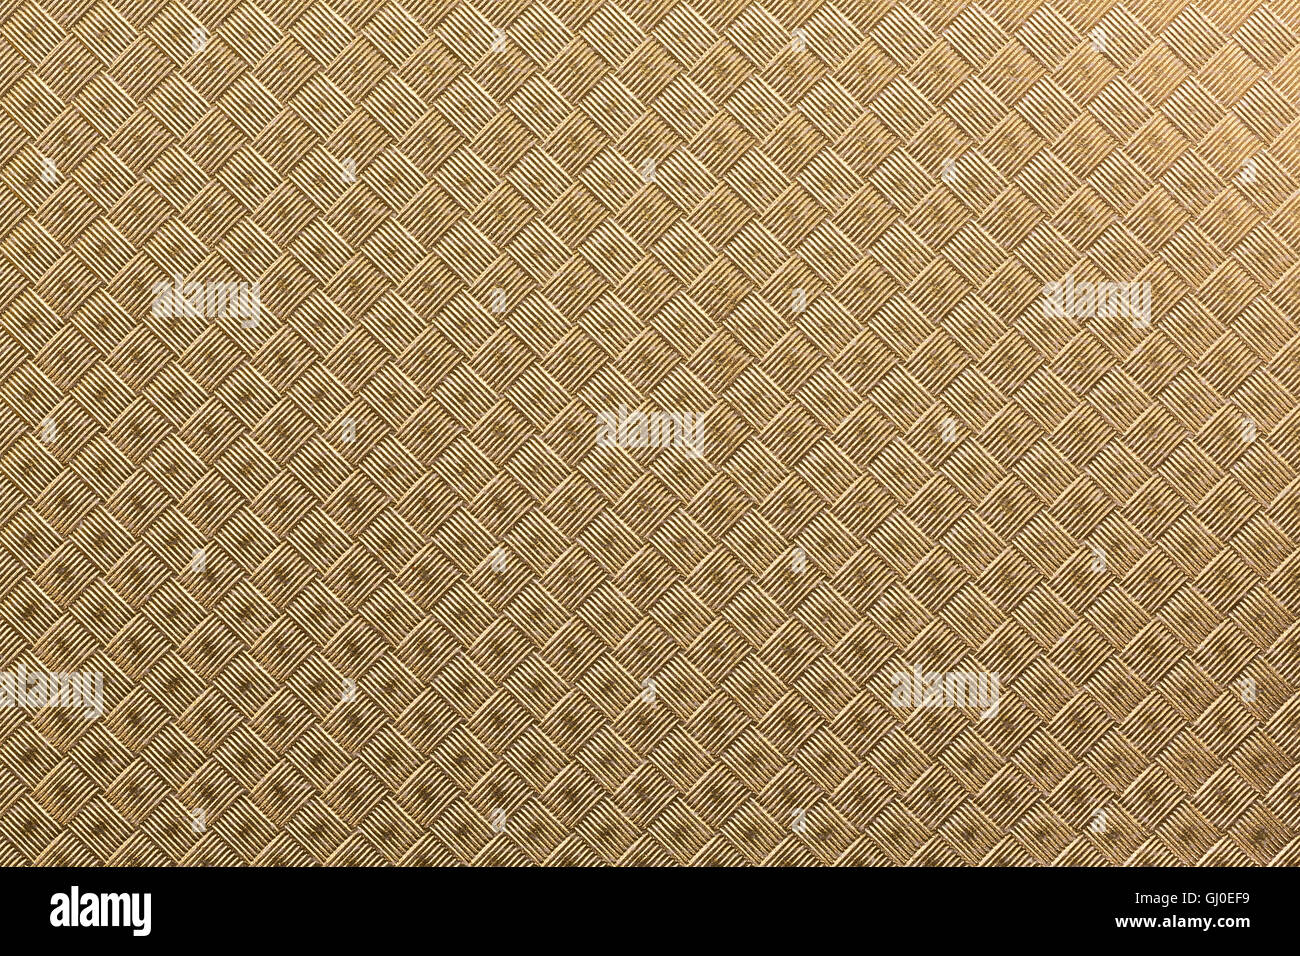 Seamless golden paper textured with rhombs Stock Photo